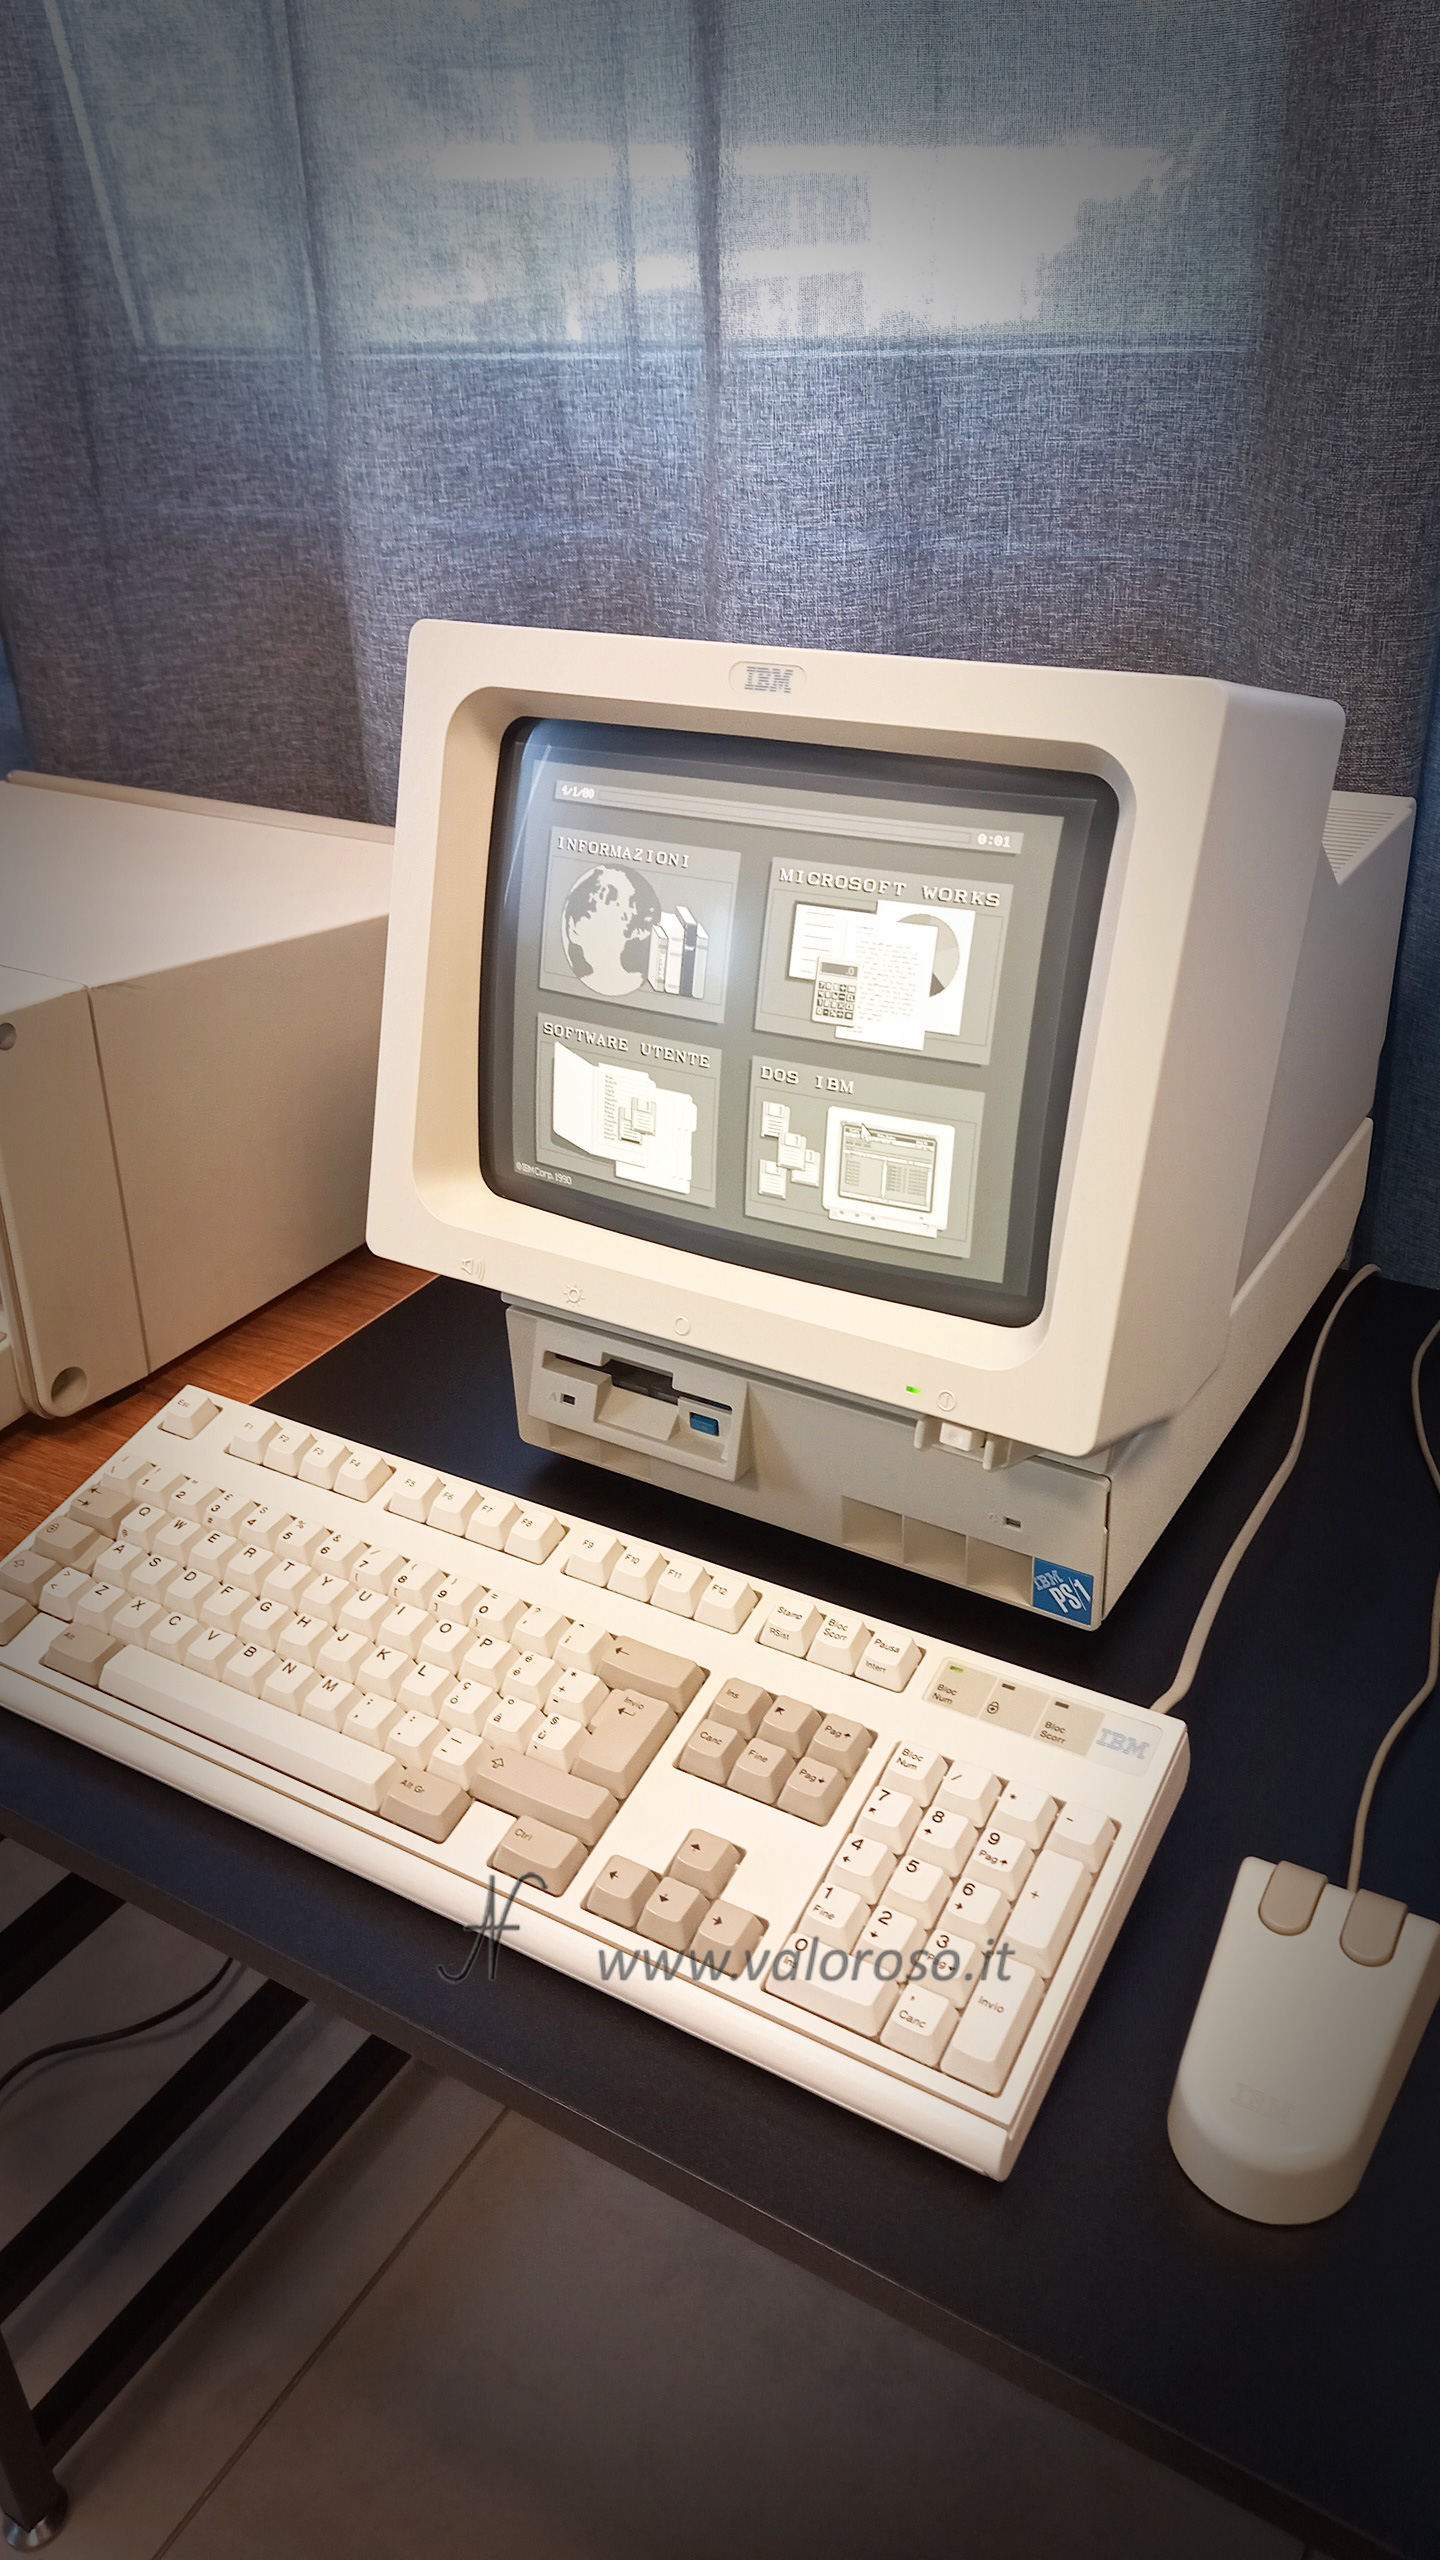 IBM PS/1, monitor CRT in bianco e nero, PS/2 mouse, keyboard IBM modem M2 buckling, floppy disk drive